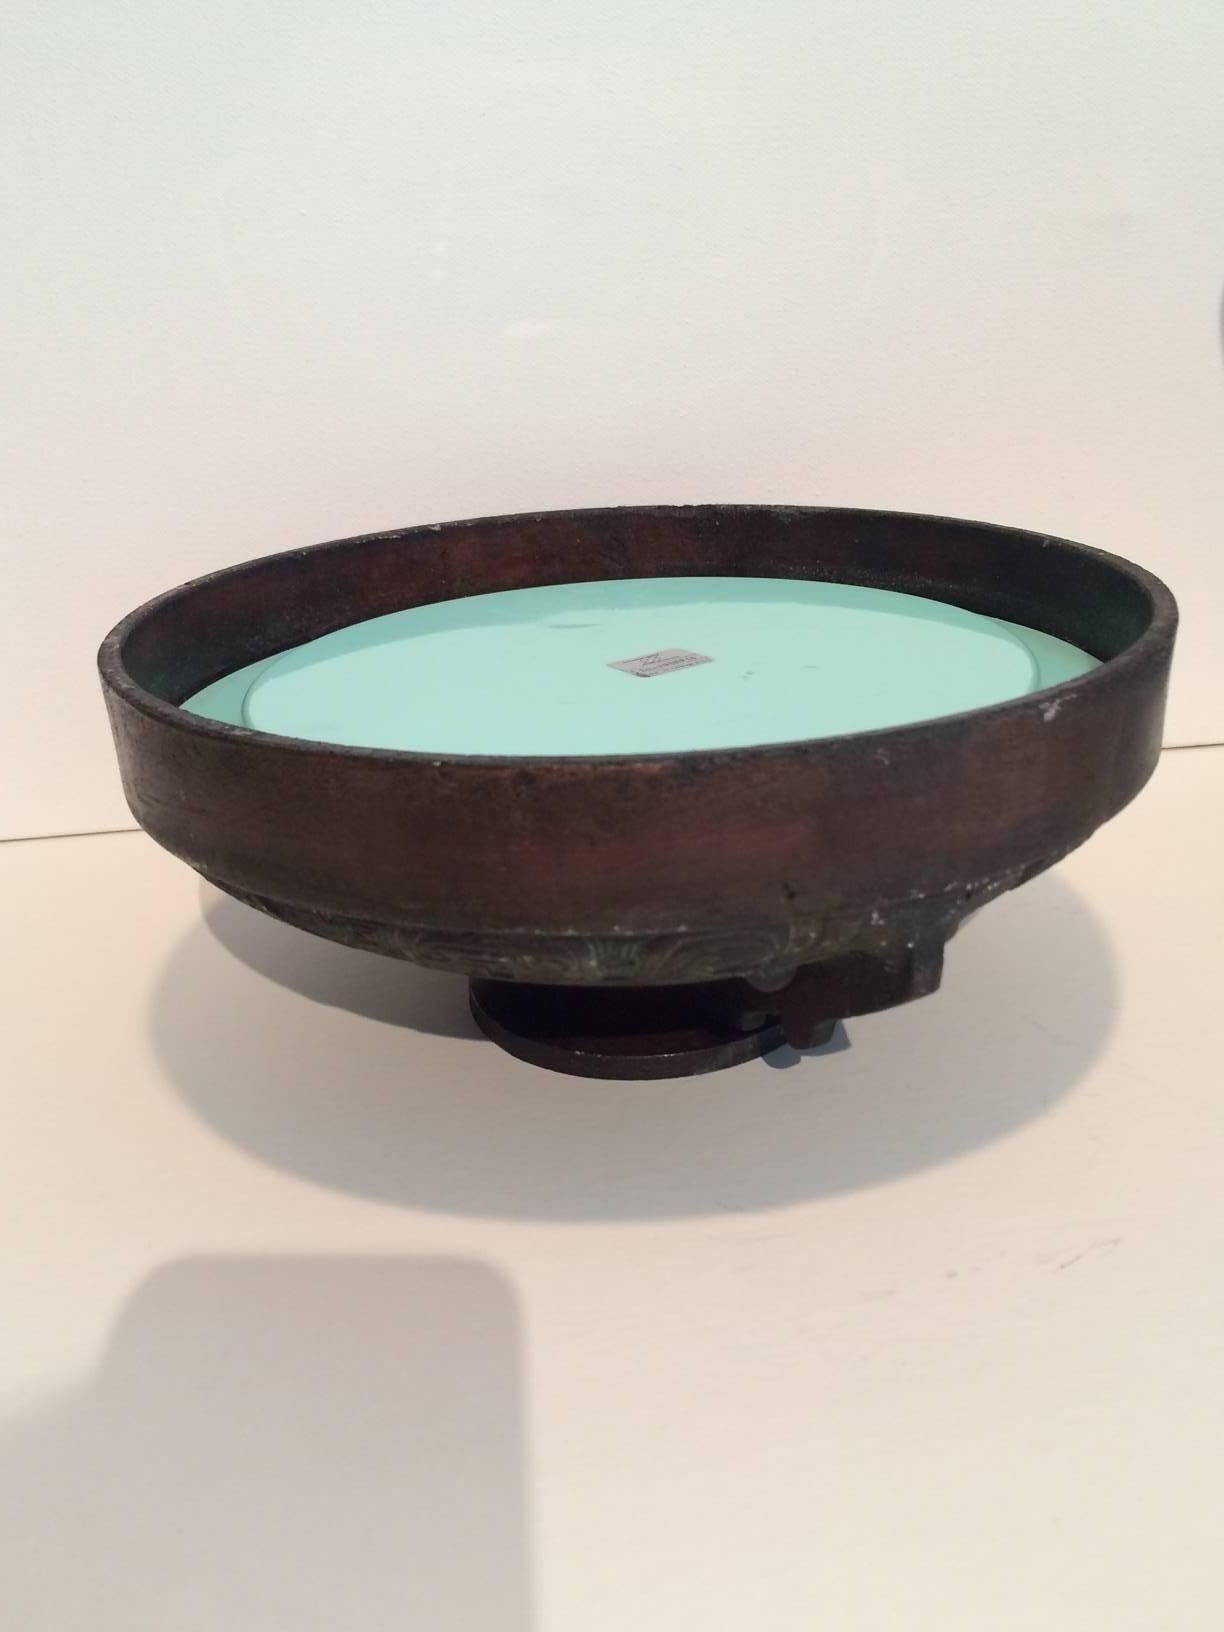 This is a beautiful and substantial ice bucket in the spirit of James Mont. In great shape and ready to be the mixer to your special function.  Turquoise plastic insert with insulation and metallic surround - in the style of a Chinese Cauldron 